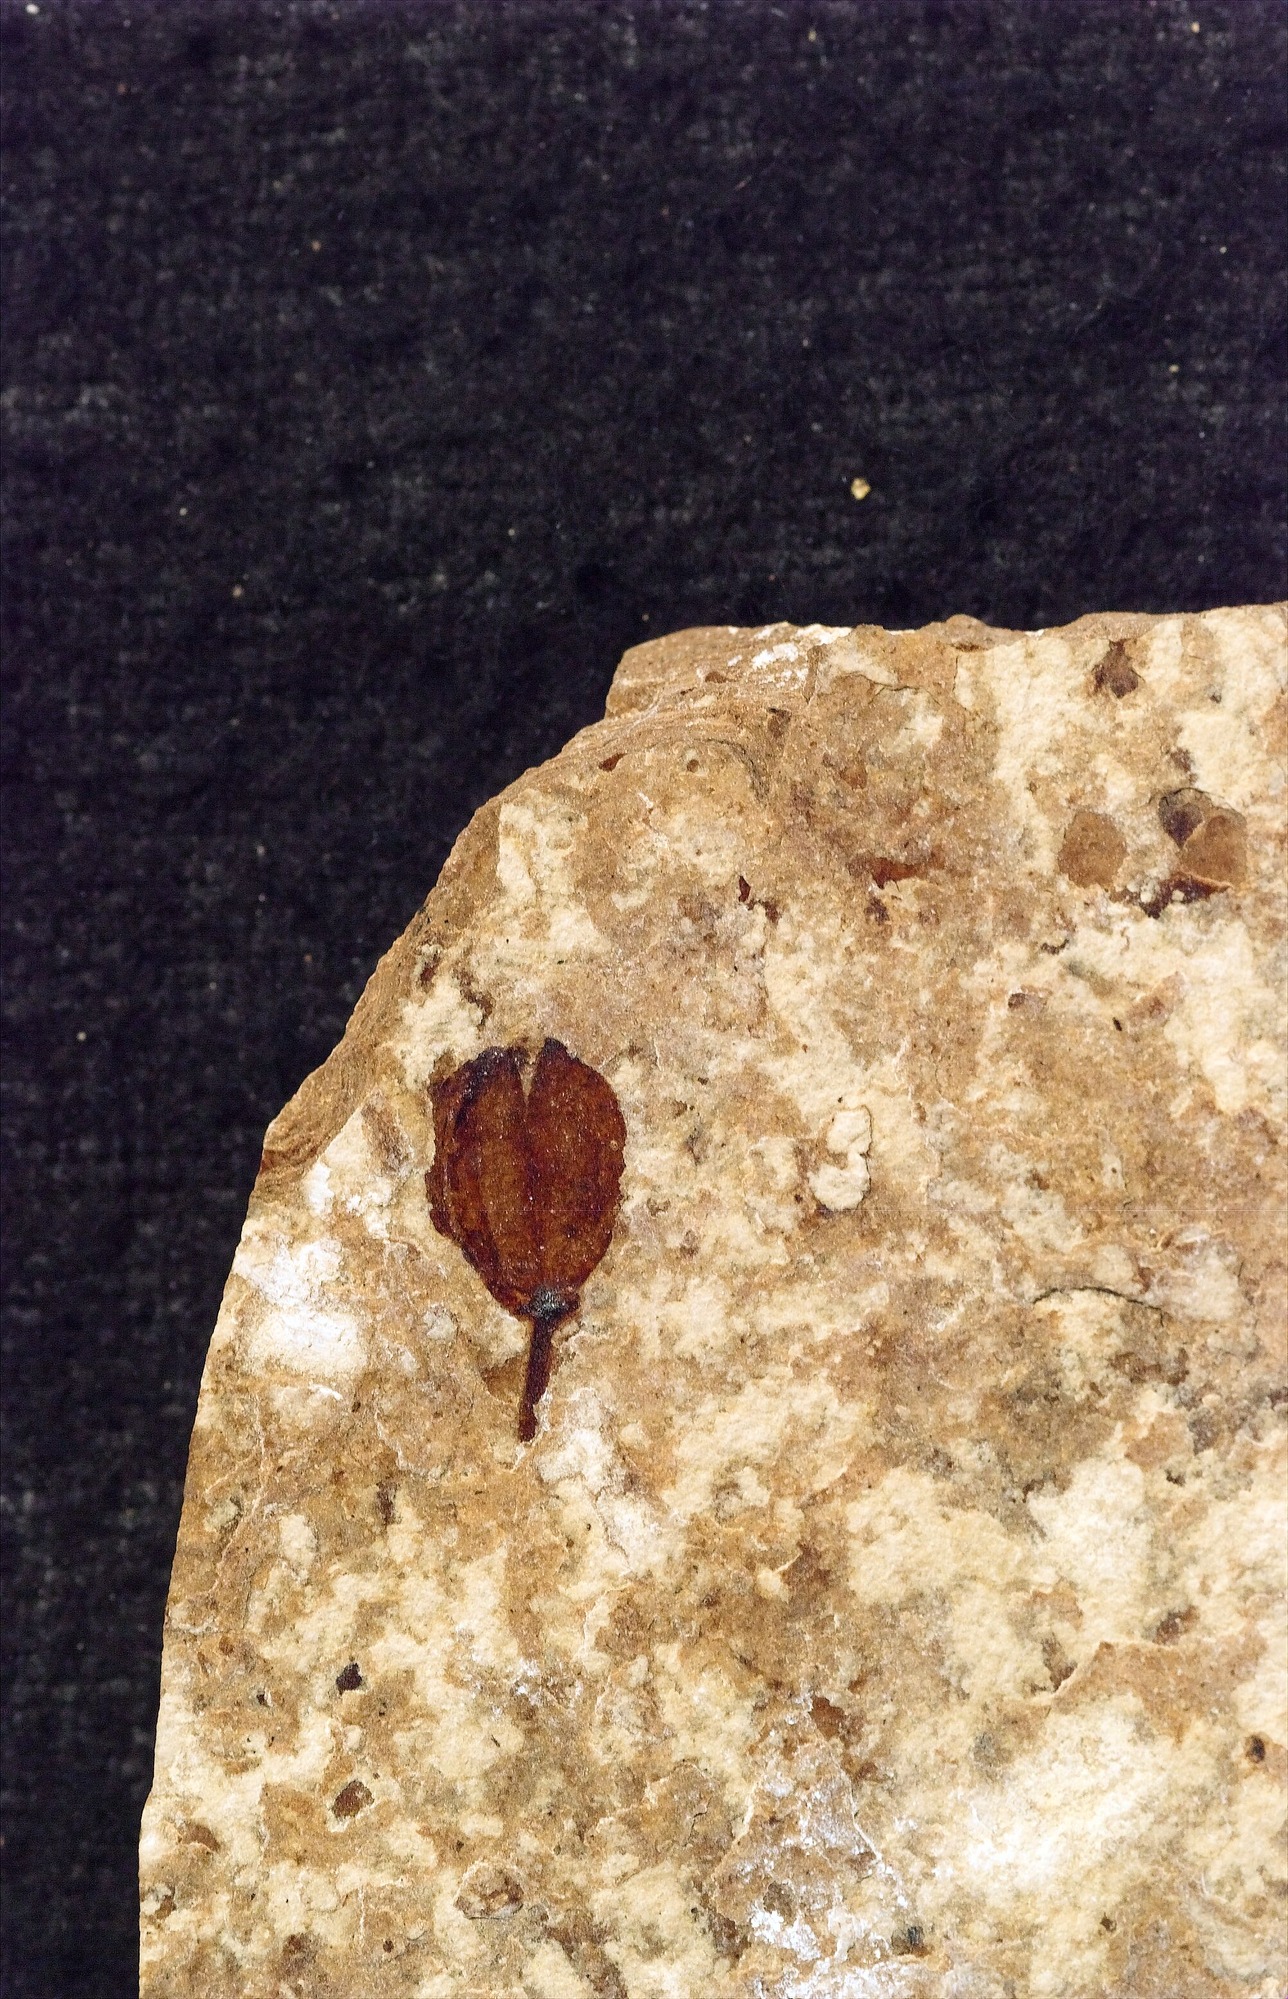 A red-brown leaf-shaped fossil with a triangle cut out from the top.